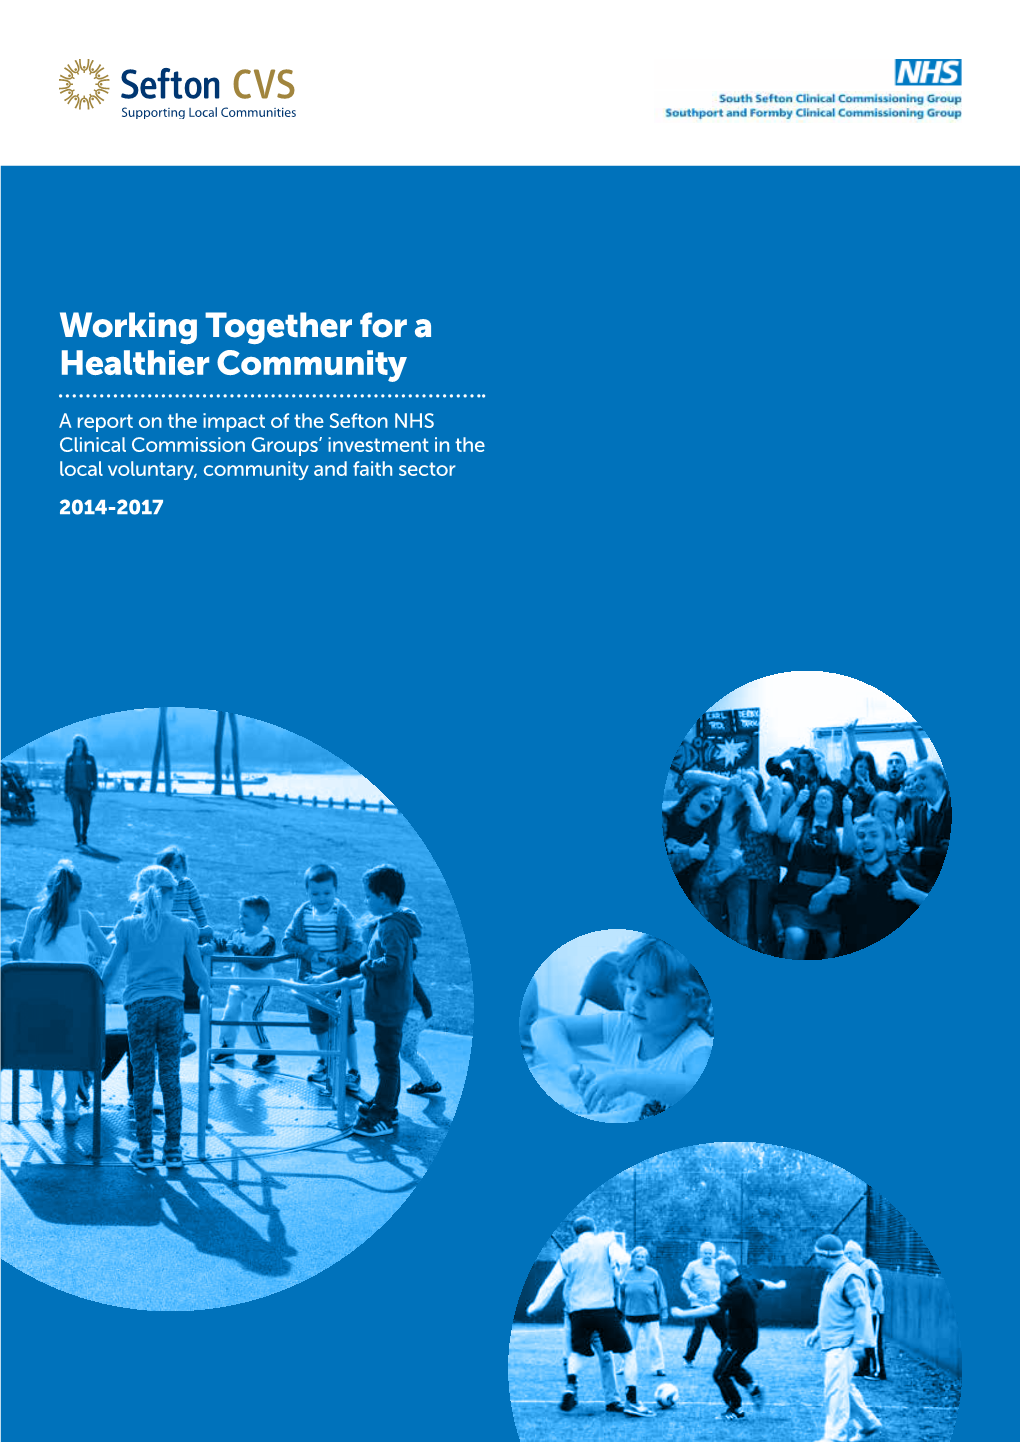 Working Together for a Healthier Community